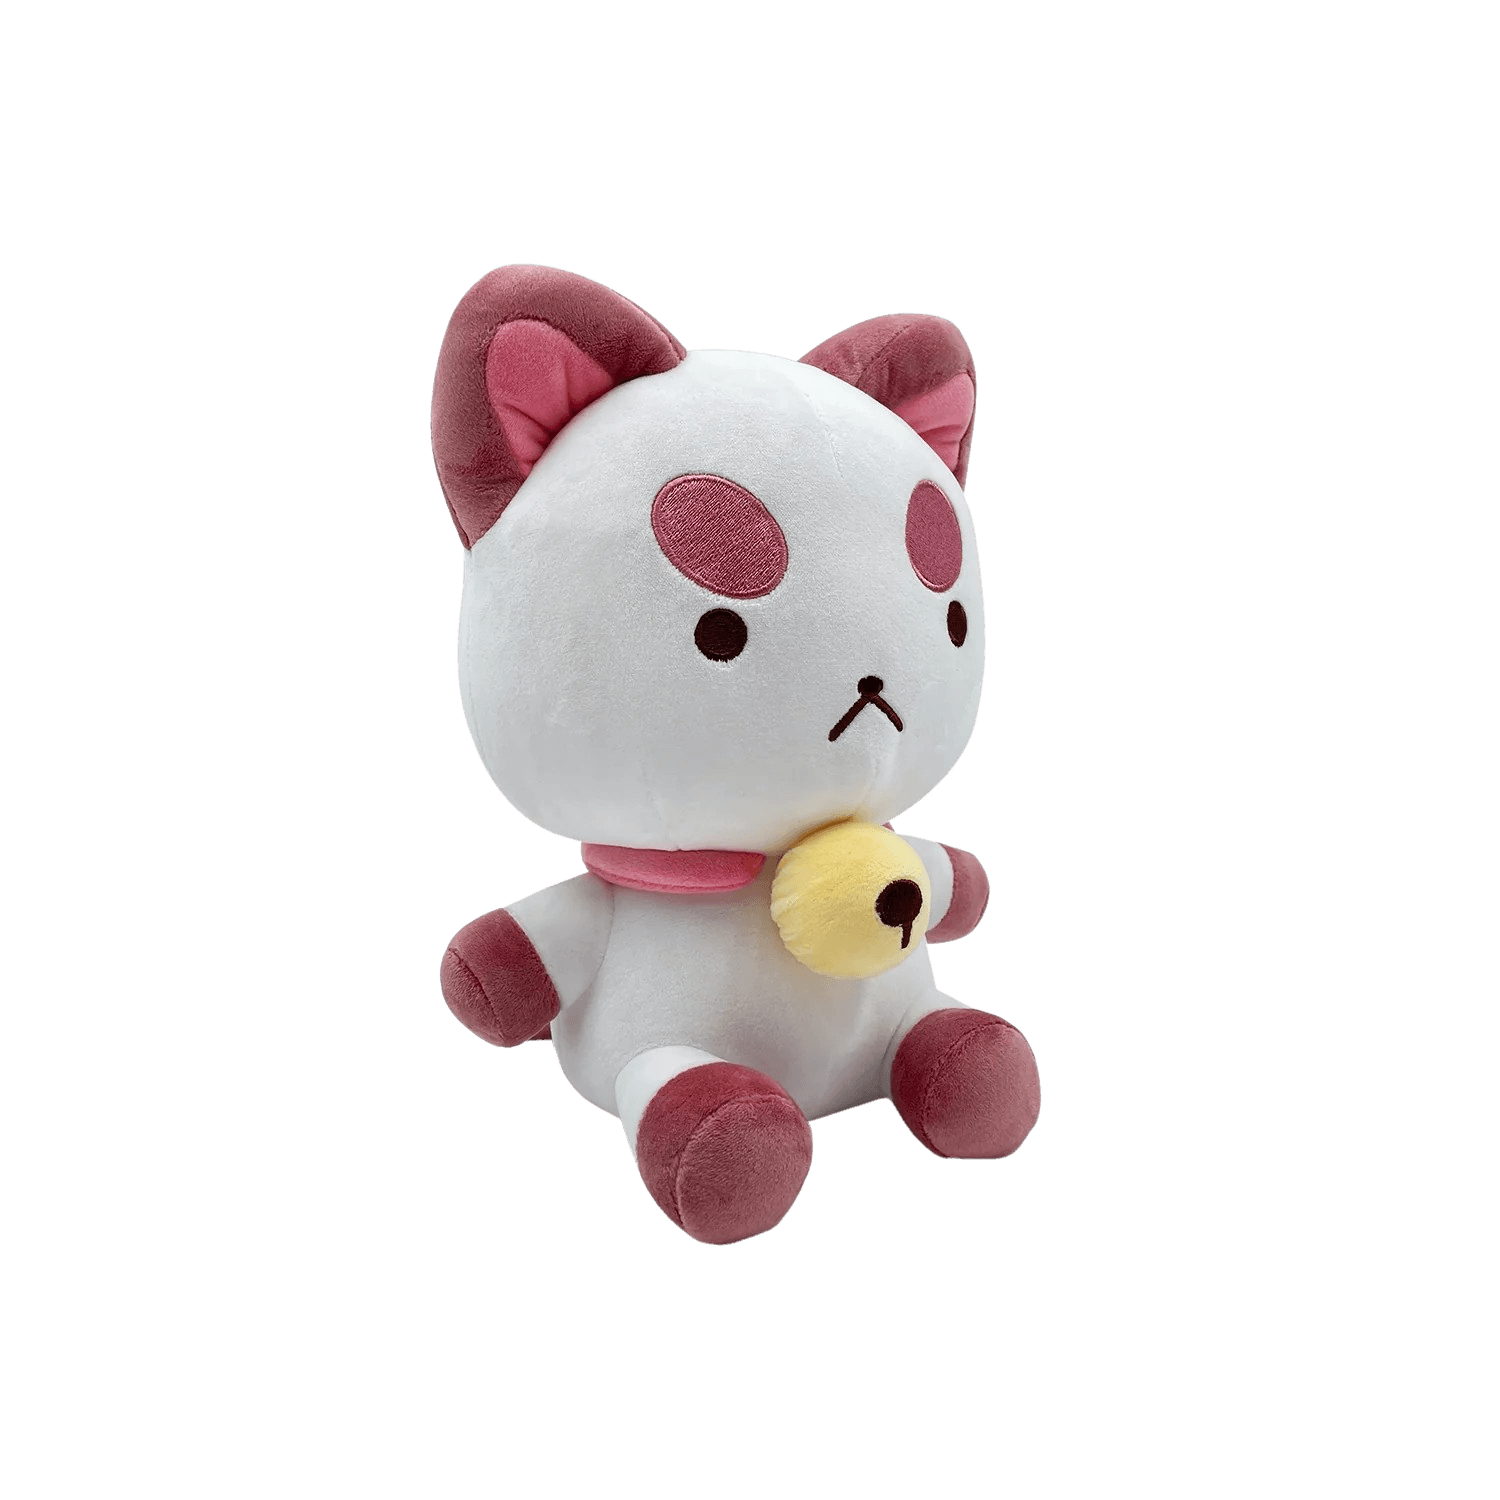 Youtooz - Bee and PuppyCat - PuppyCat Plush (9in) - The Card Vault